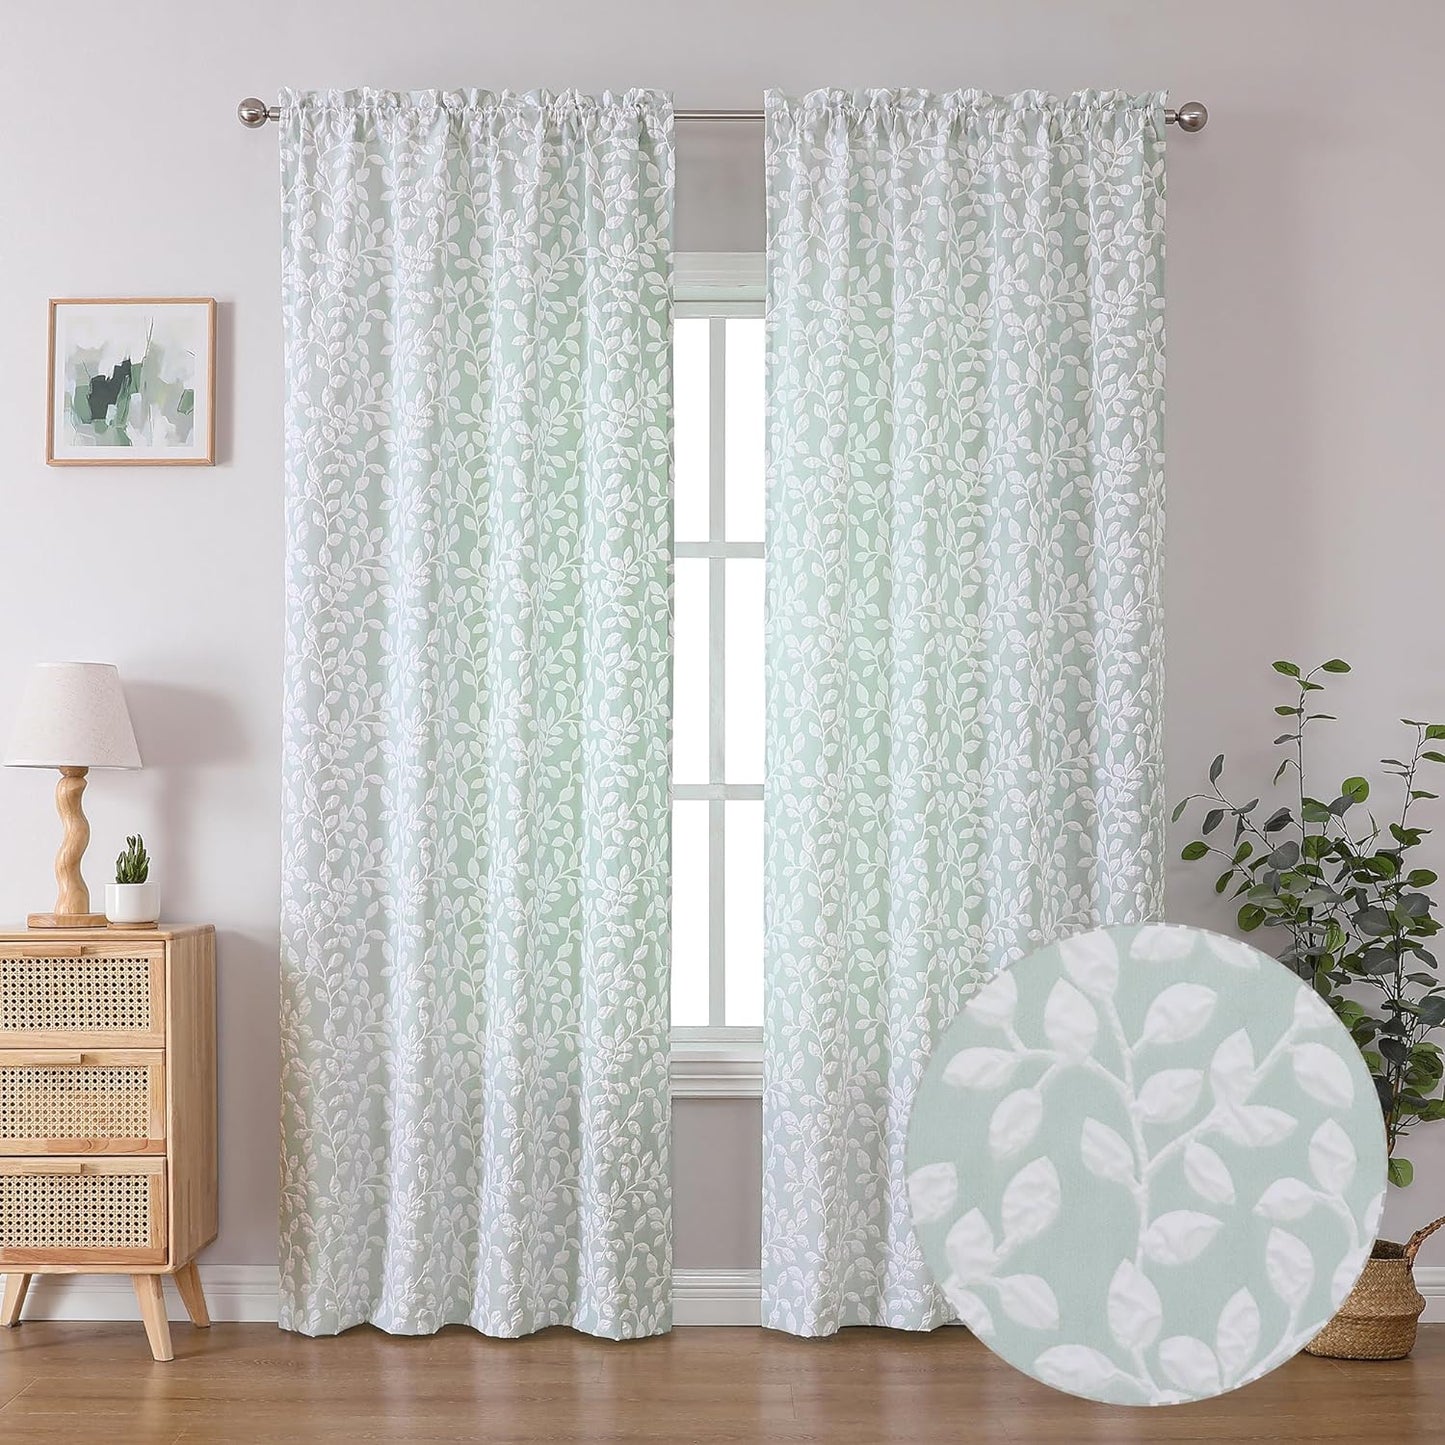 Chyhomenyc Anna White Taupe Curtains 63 Inch Length 2 Panels, Light Filtering Soft Airy 3D Embossed Textured Leaf Pattern Drapes for Bedroom Living Room Windows, Each 42Wx63L Inches  Chyhomenyc Green White 42 W X 84 L 